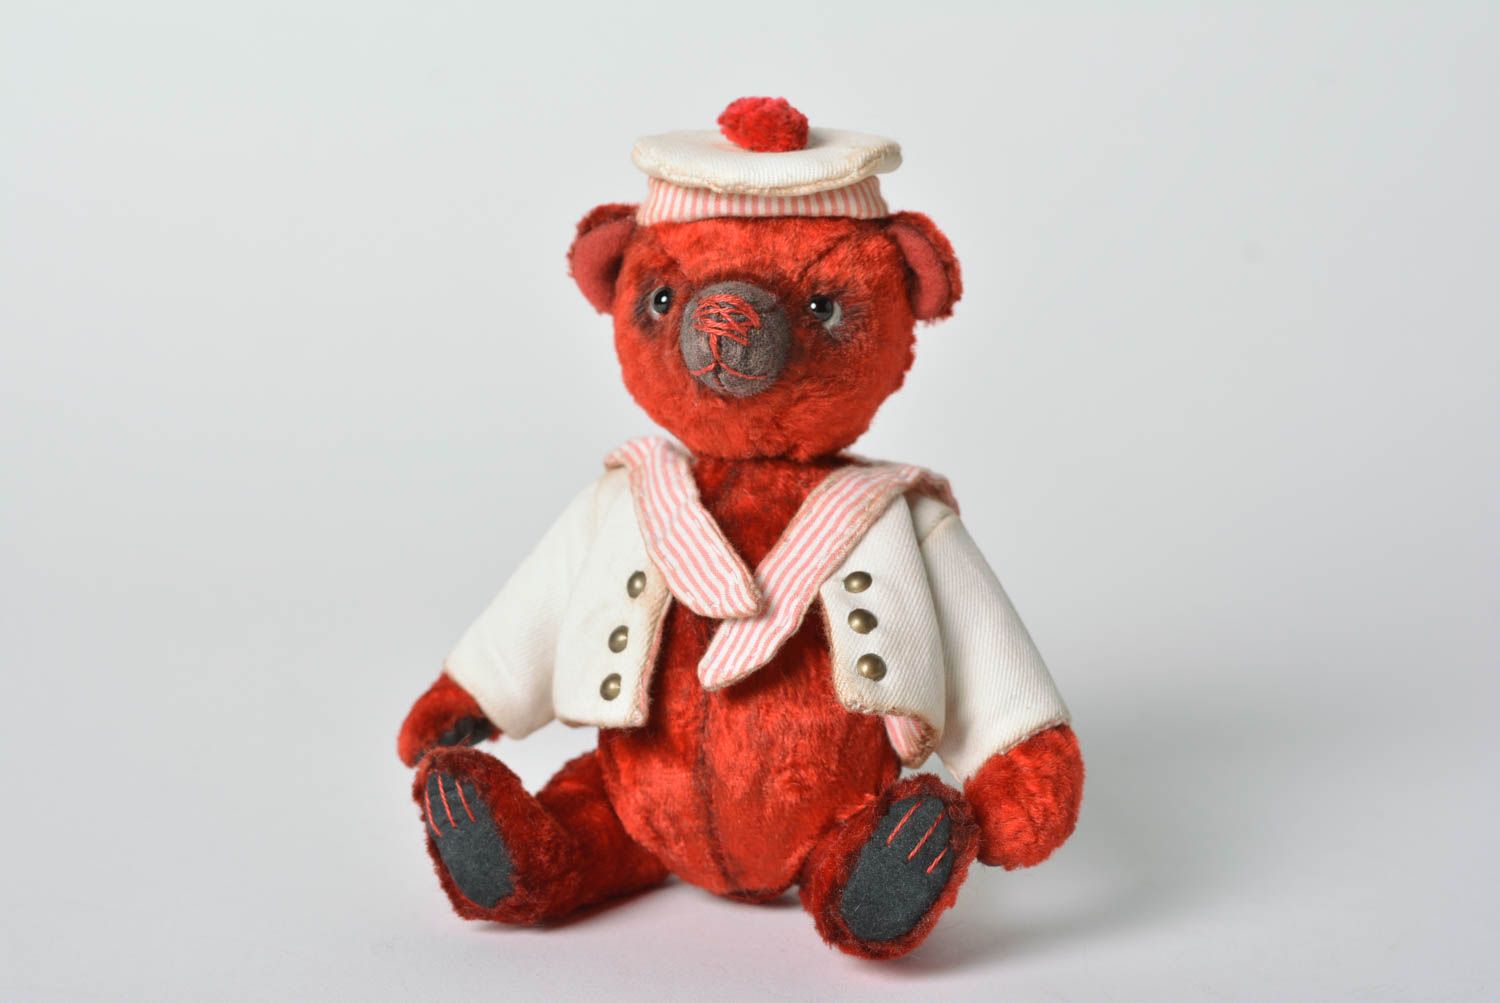 Handmade toy red teddy bear unusual gift animal toy baby toy stuffed toys photo 2